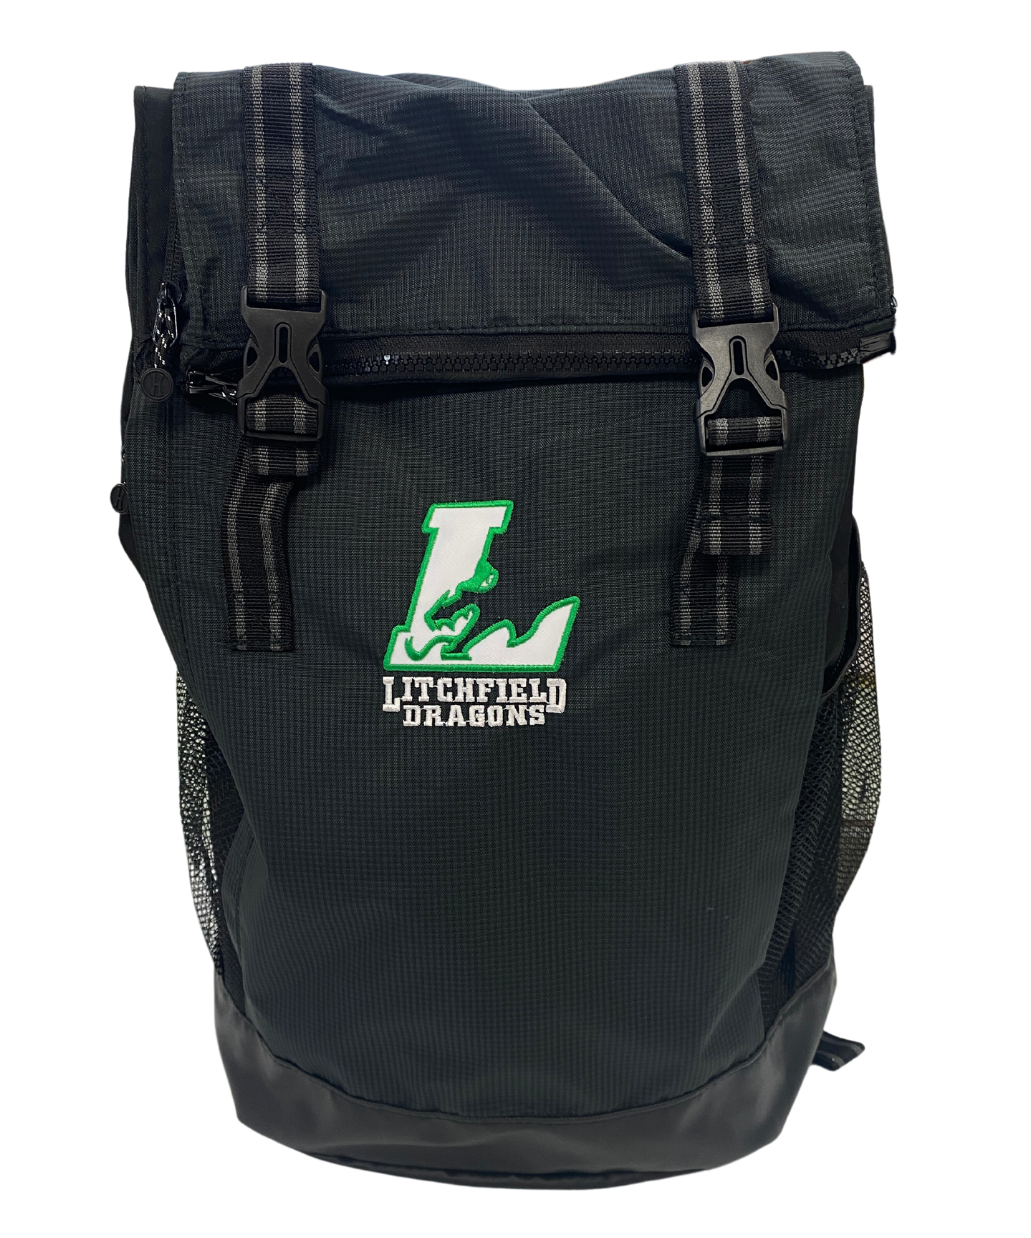 Holloway Lfd Dragons Expedition Backpack